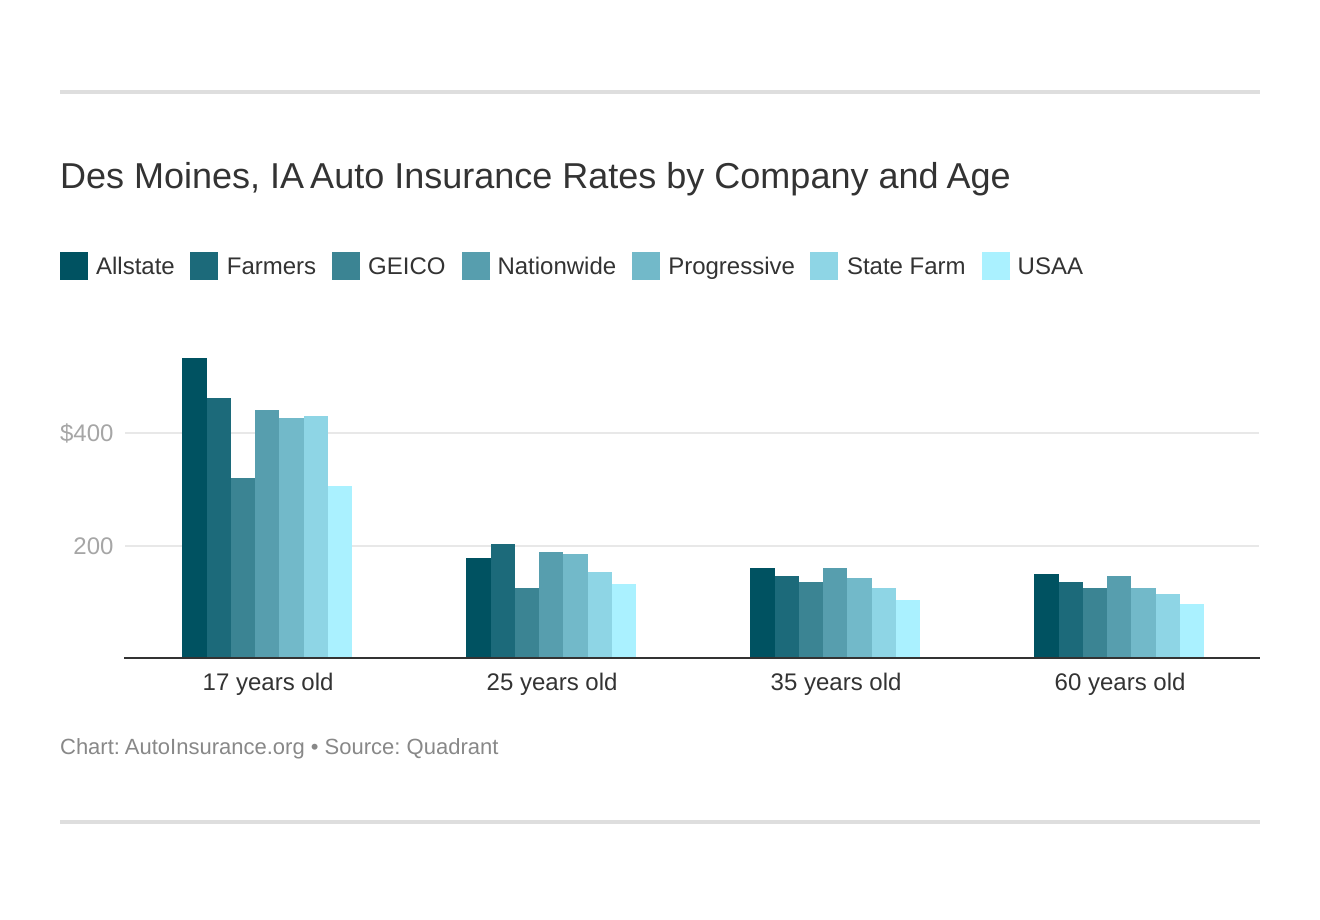 Des Moines, IA Auto Insurance Rates by Company and Age